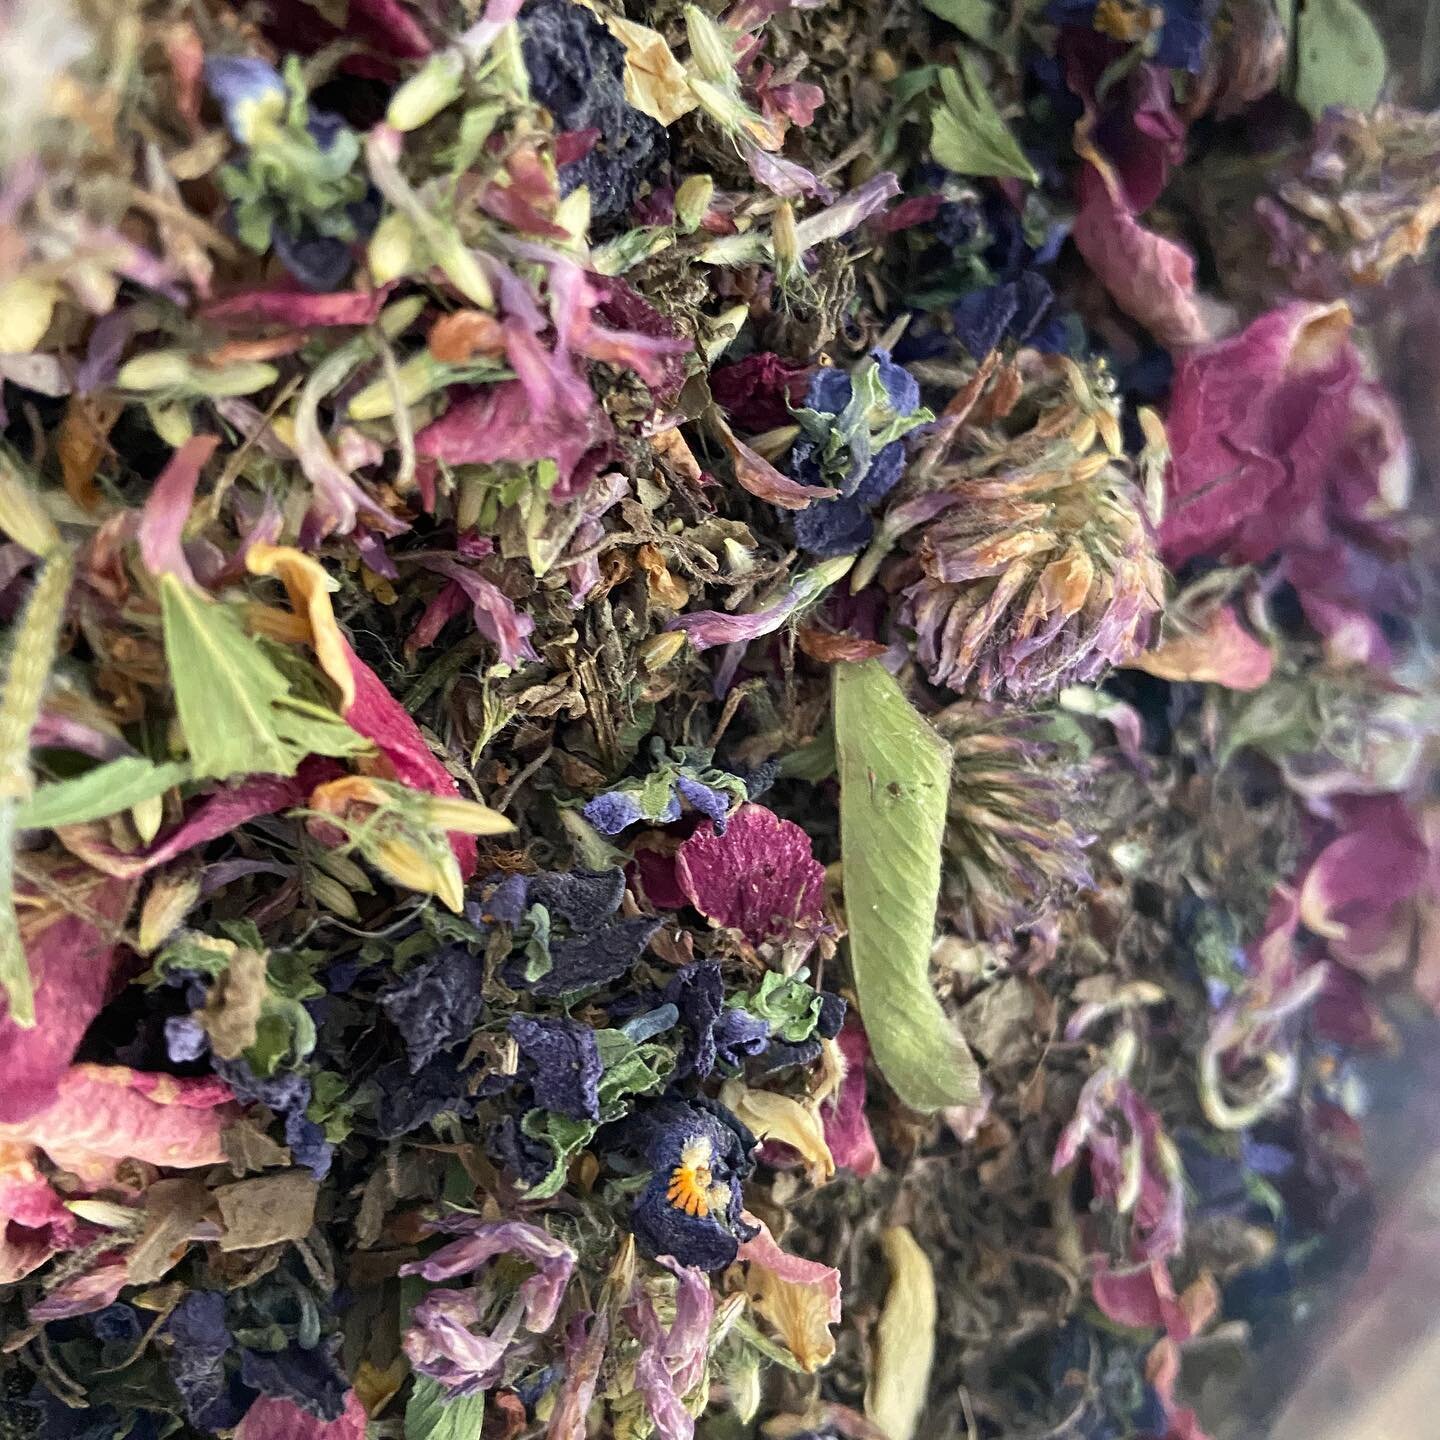 Tea is drinking a warm hug from Mother Nature.
.
A steep of gentle harmonious notes of compounds coaxed to release to form a soothing elixir. 
.
Tea is one of the softest yet profound medicines there is &amp; it brings me great joy to listen to a lit